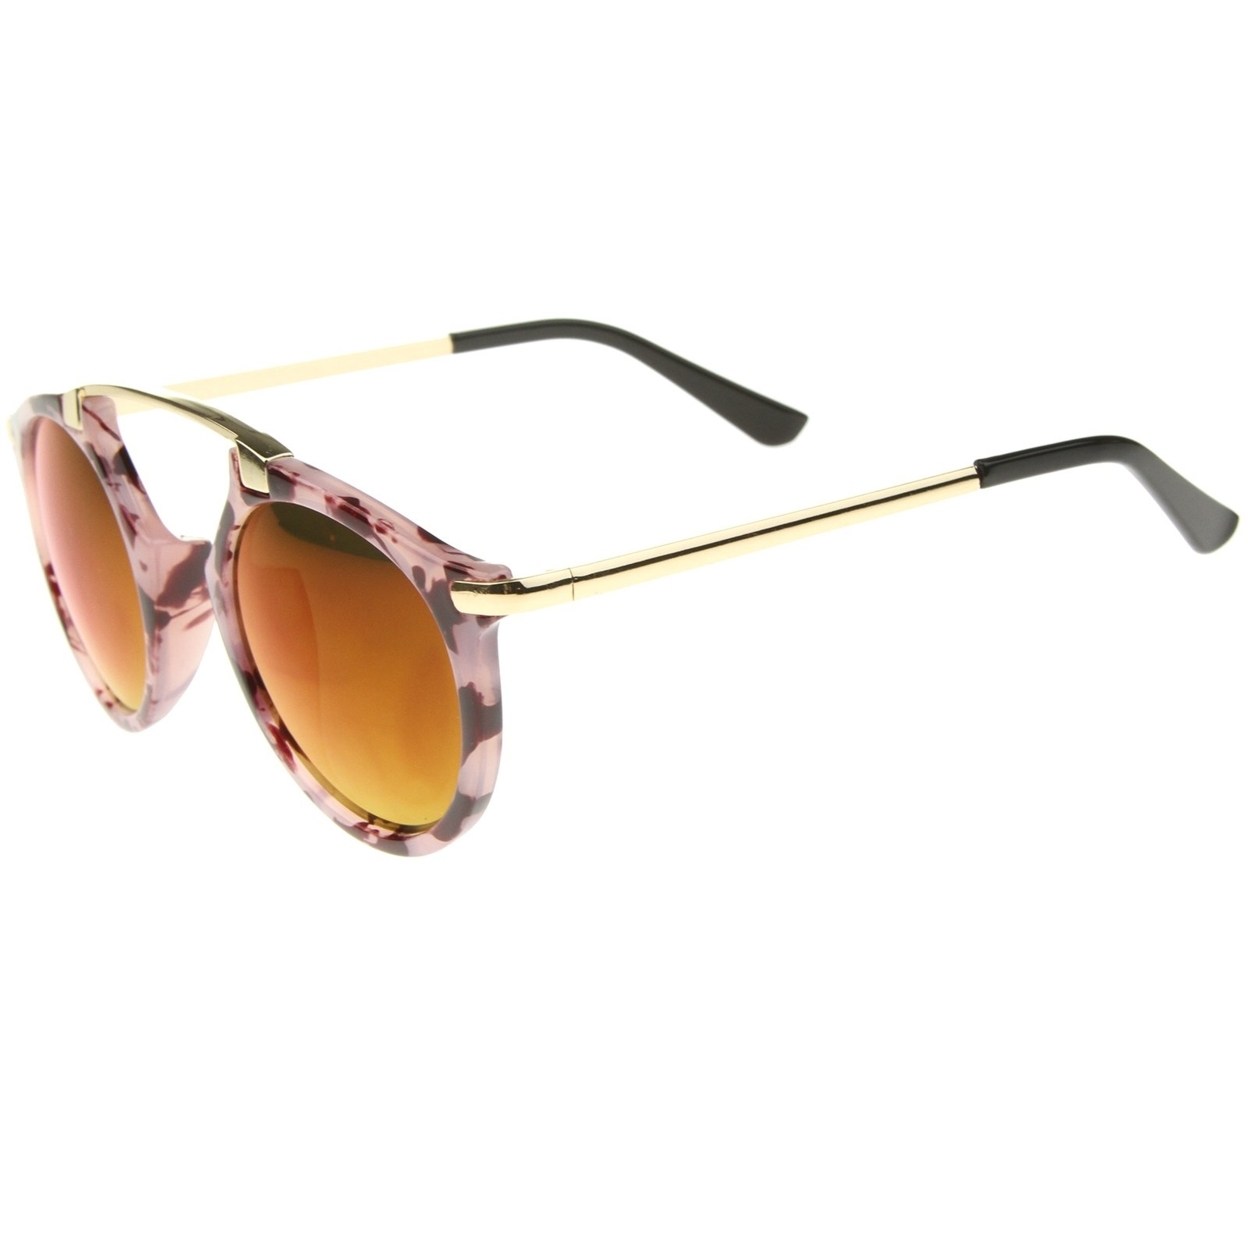 High Fashion Arched Marble Color Frame Color Mirror Pantos Aviator Sunglasses 48mm - Smoke-Gold / Yellow Mirror